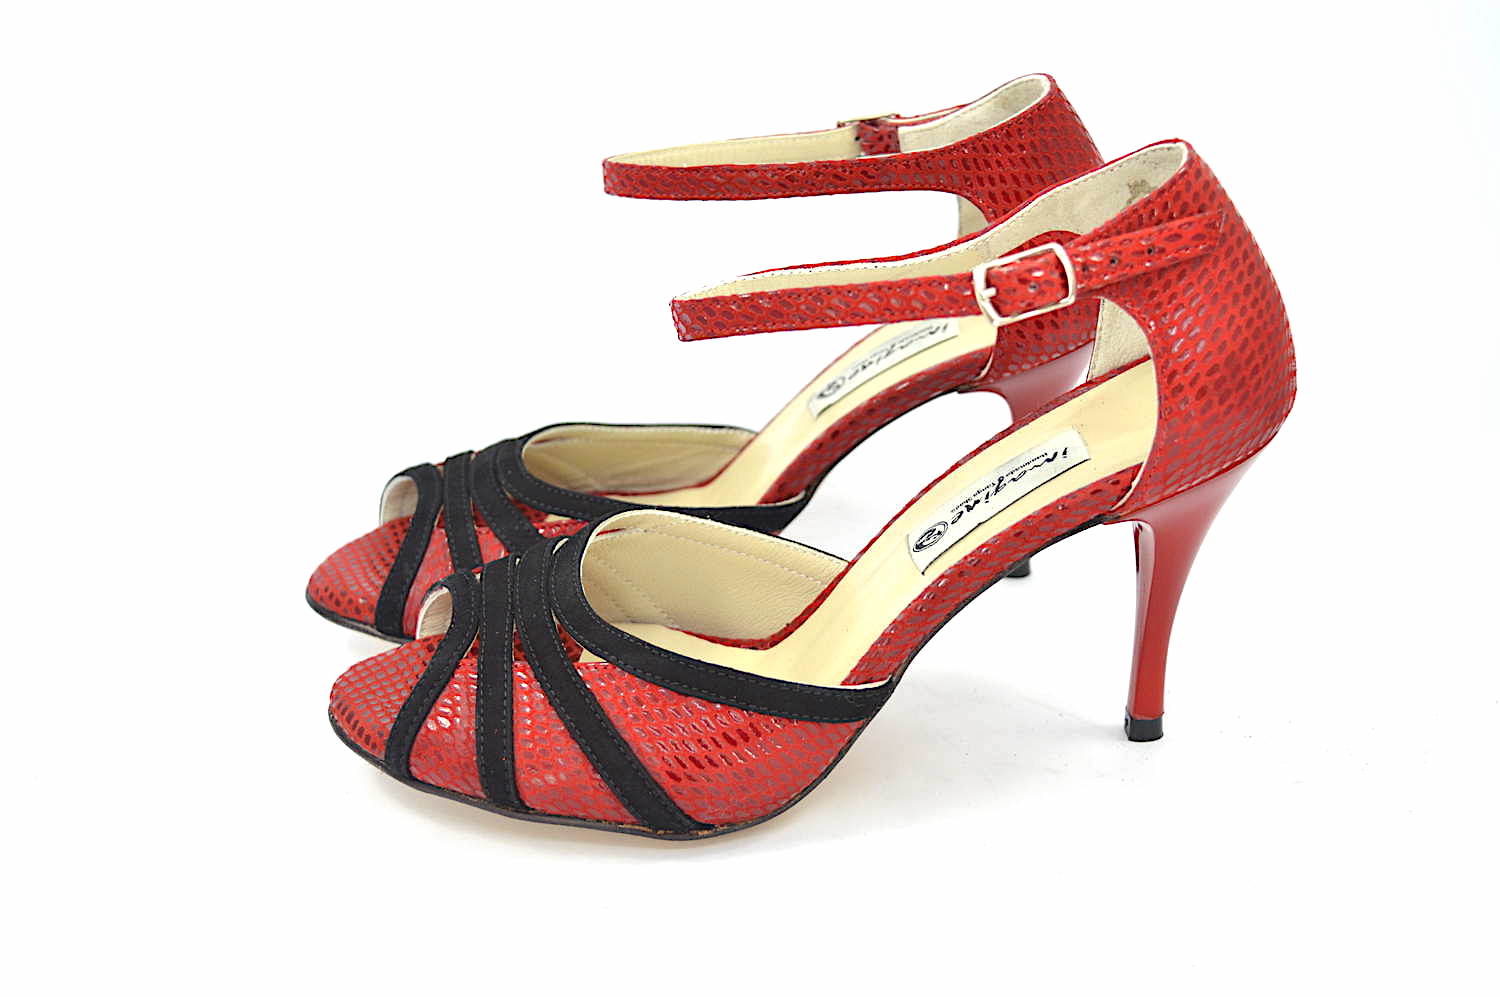 Women's Tango Shoe, peep toe style, with impressive red snake leather and black suede